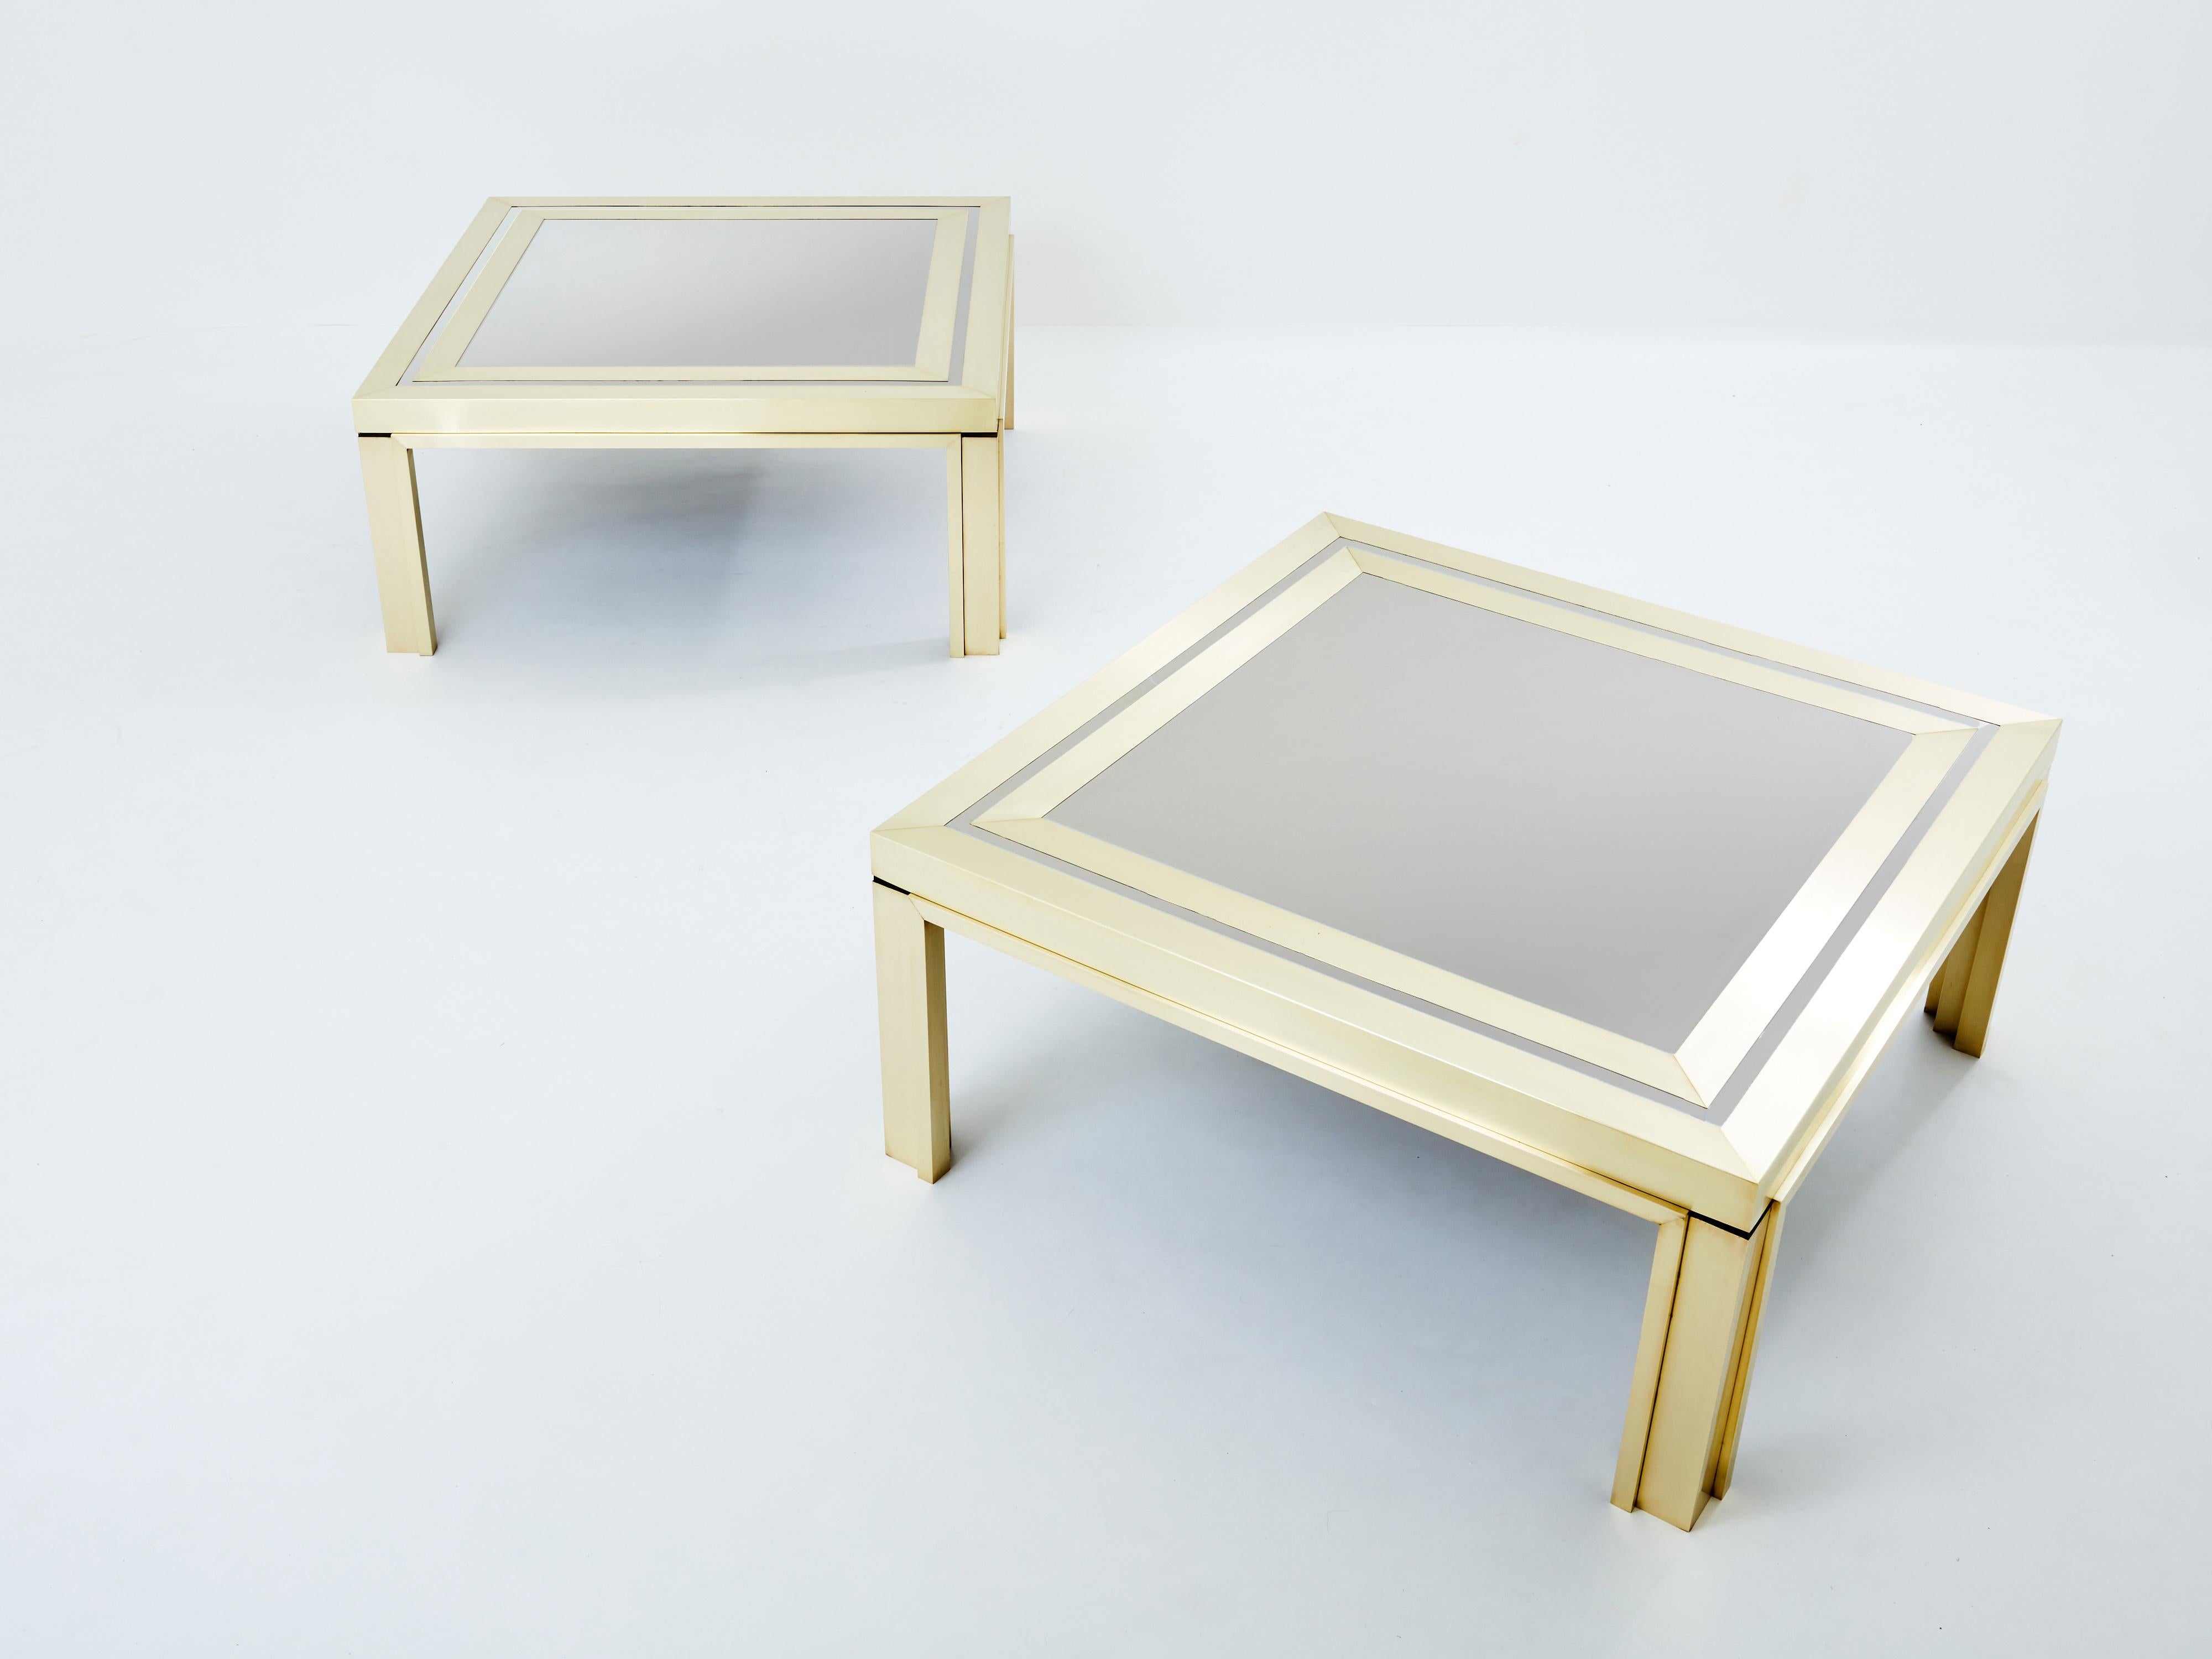 Simple lines and strong presence point to this pair of Italian coffee tables. Designed by Giacomo Sinopoli and produced by Liwan’s Rome in the late 1970s, they feature a massive brushed brass structure, with stainless steel tops. Its symmetry and